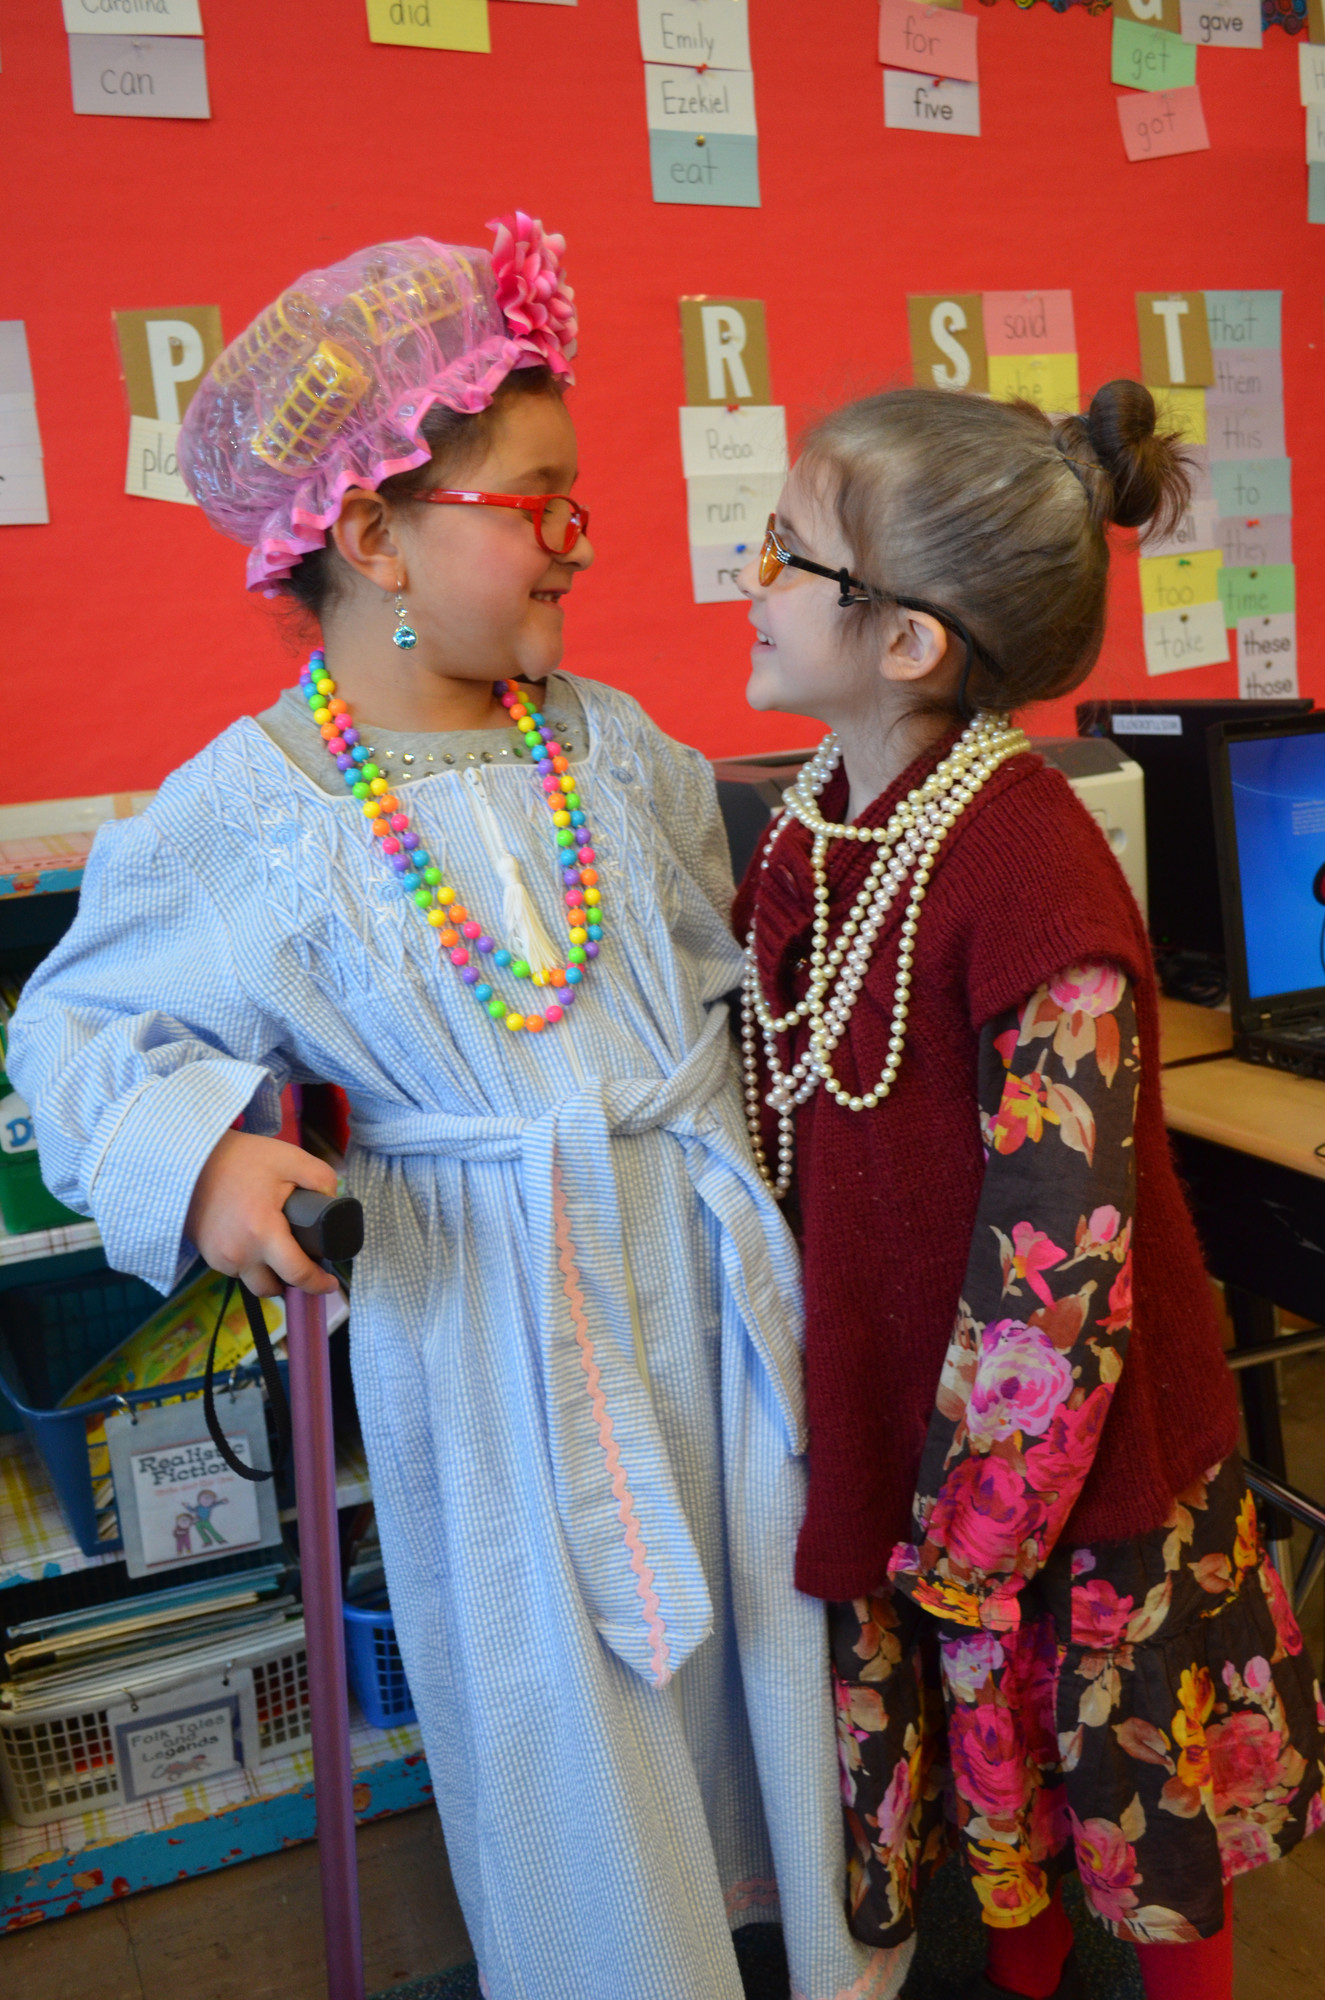 Carolina Figueroa, 7, at left, and Emily Carr, 6, of Ms. Anderson’s first grade class dressed up as 100-year-old women to celebrate.